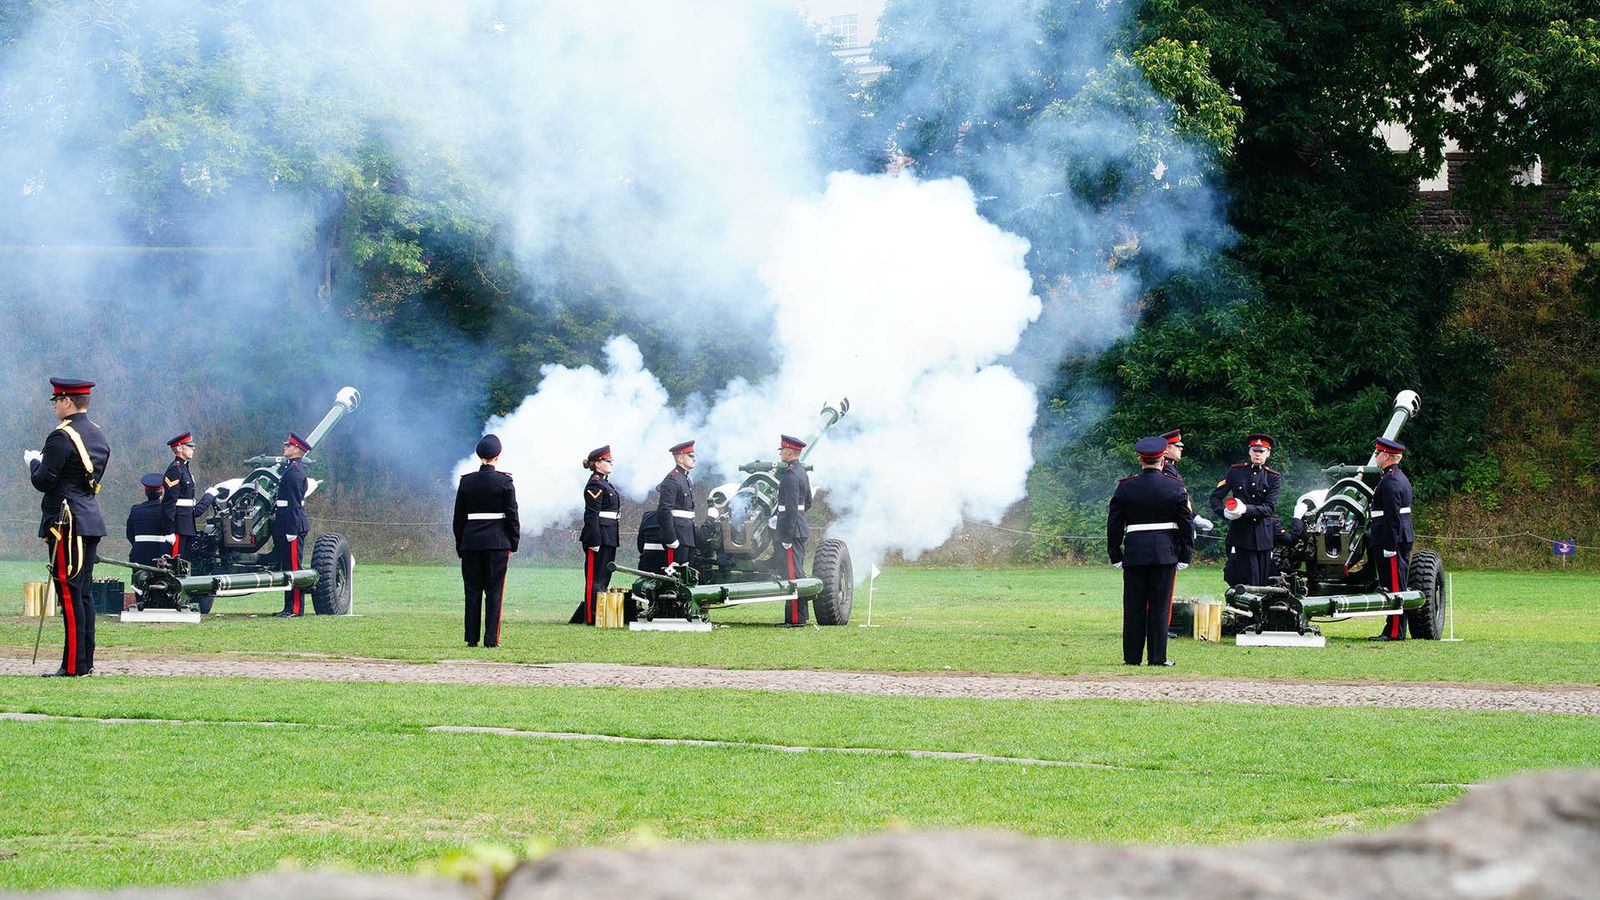 Accession Day Royal Gun Salutes Celebrated Across the UK